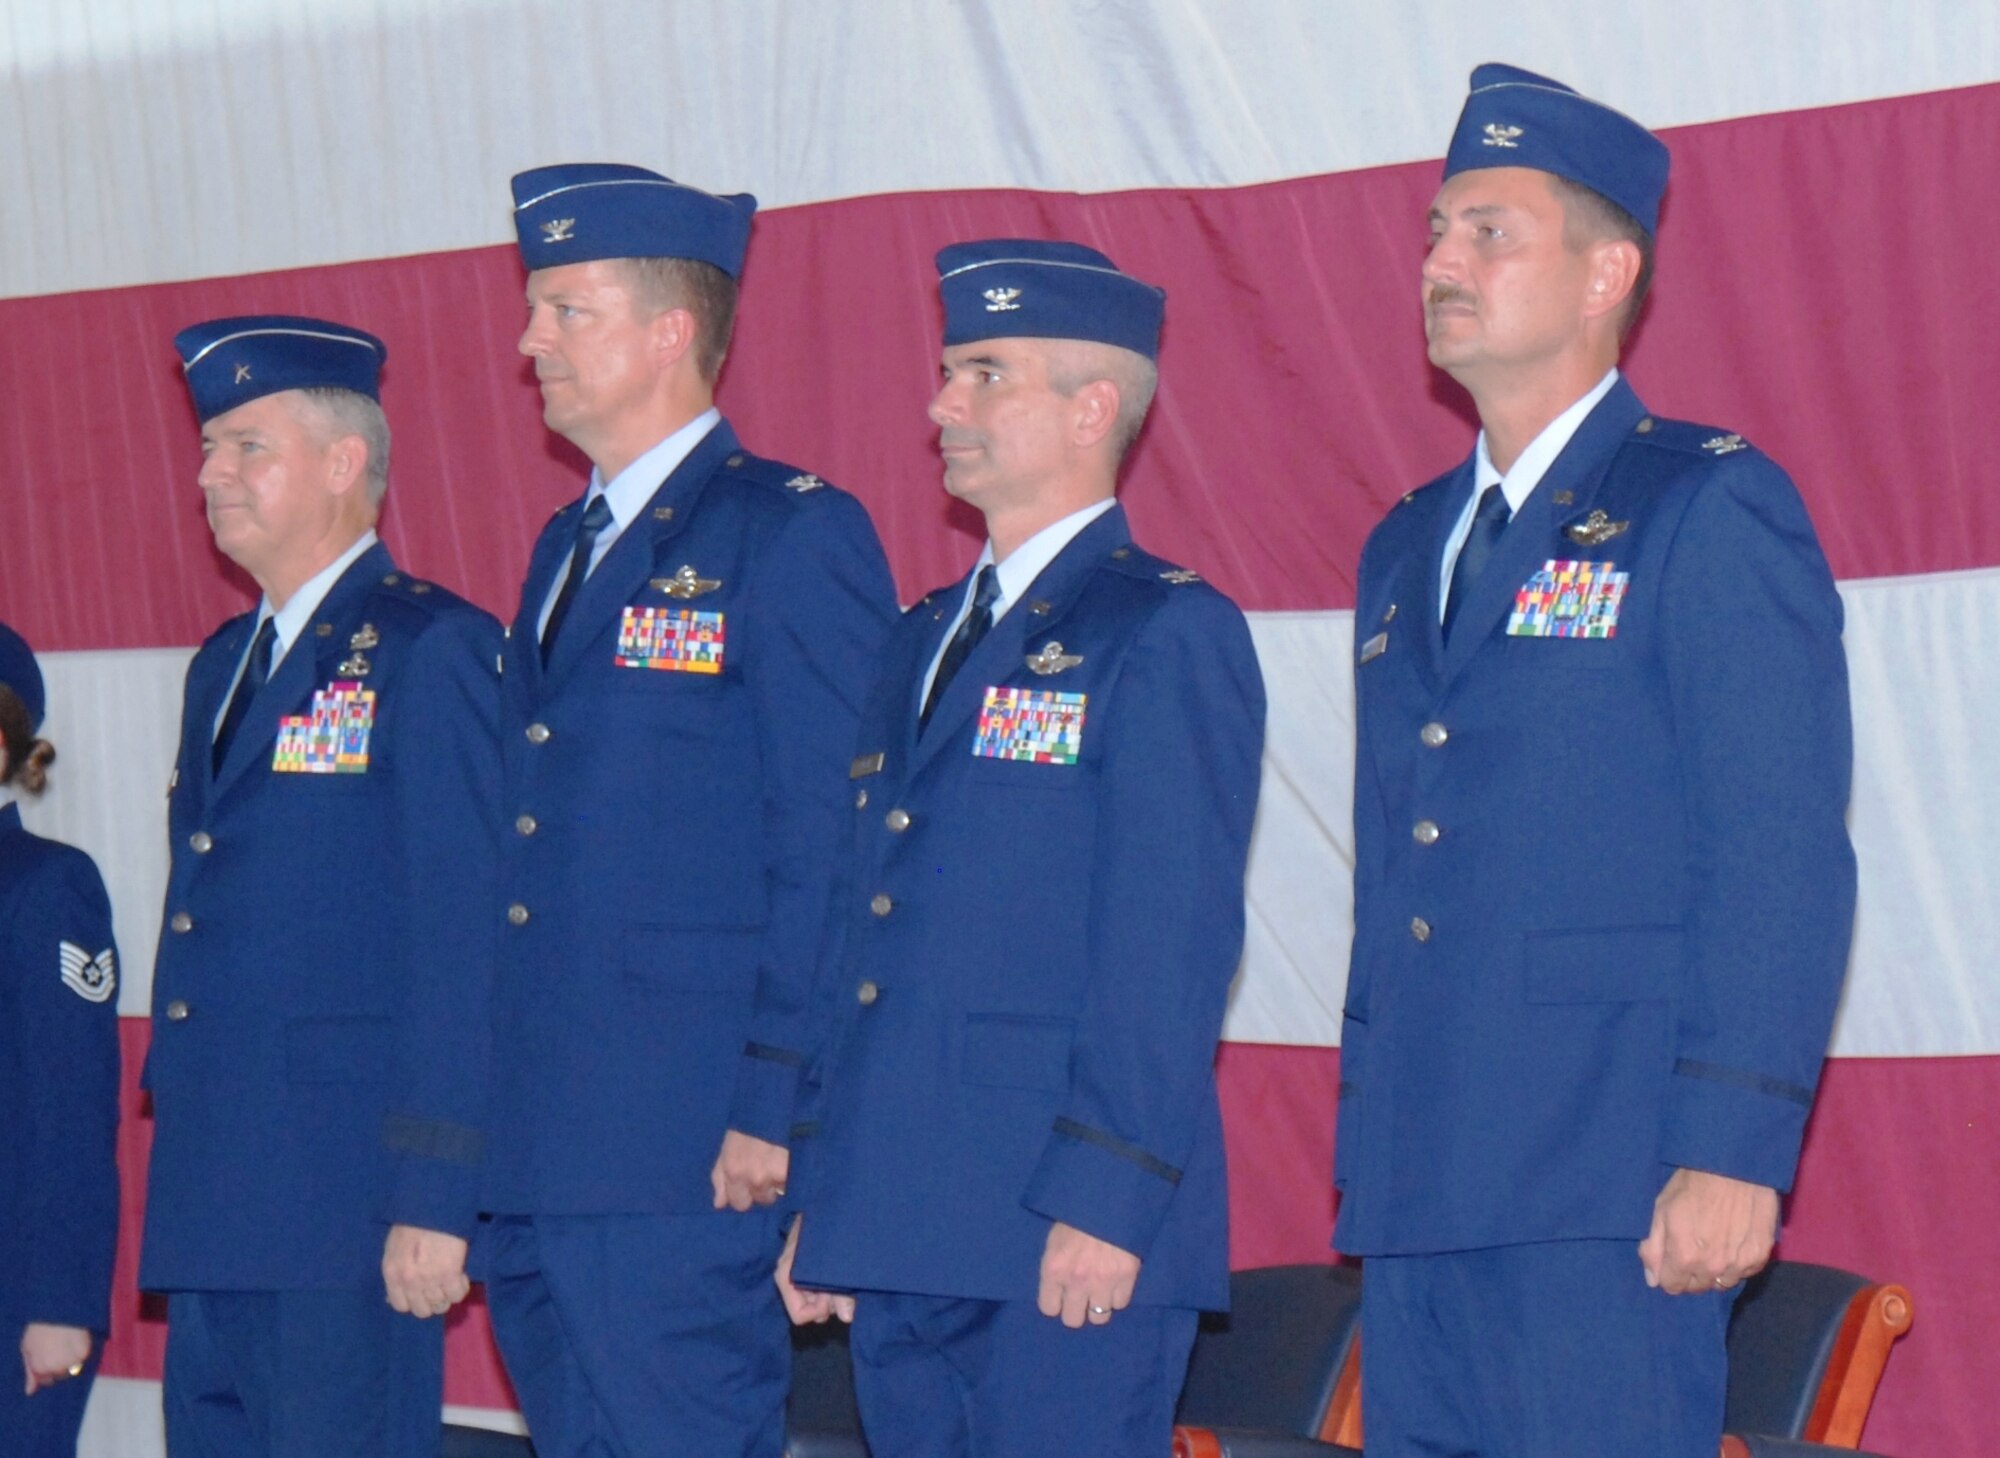 U.S. Air Force Brig. Gen. Joseph Balskus, left, Col. Randy Spear, second from left, Col. Thomas Cucchi, third from left, Col. Scott Barberides, far right, stand at attention during the playing of the Air Force song at the end of the 101st Air & Space Operations Group (101st AOG) change of command ceremony held here June 11, 2011. This was the very first change of command ceremony for the 101st AOG, which was officially activated July 1, 2009. (U.S. Air Force photo by Maj. Steve Burke/Released)